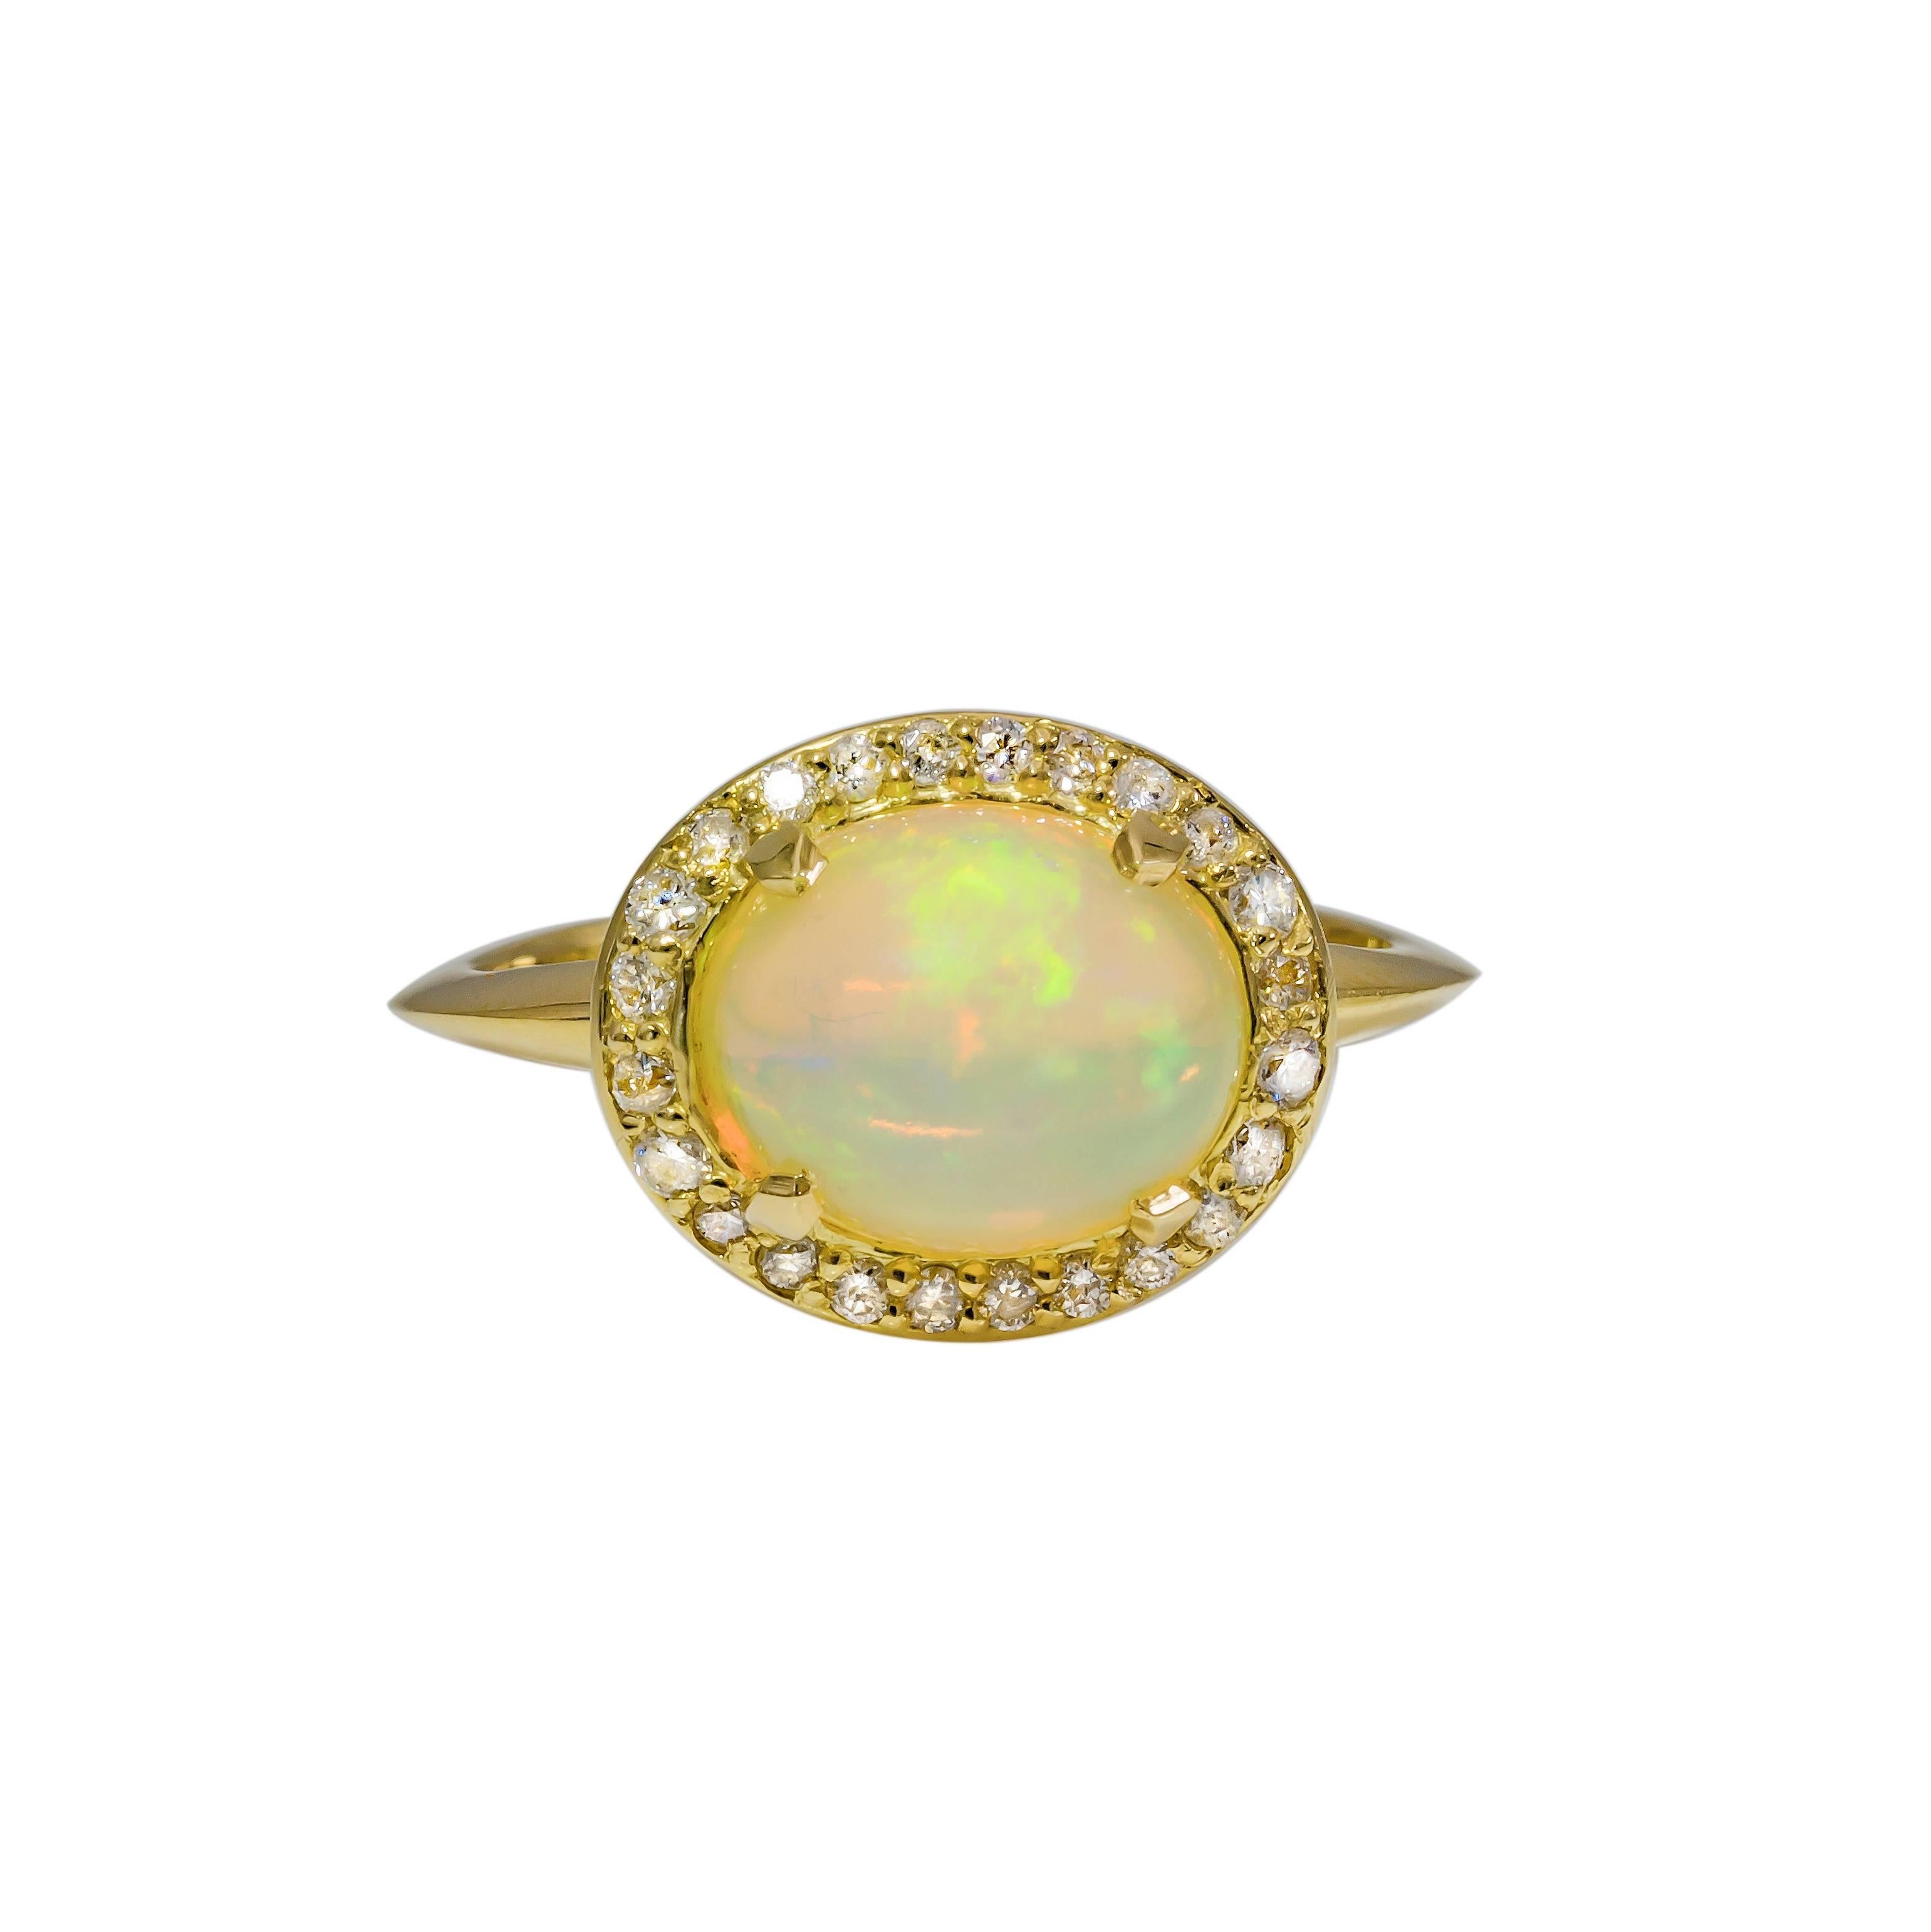 This ring is lovely and special as the combination of the dreamy opal is magnified by the multitude of diamonds set in warm 18k gold. This stunning opal is from Ethiopia and is aprox. 2.25 ct. and surrounded by a halo of bright white diamonds that